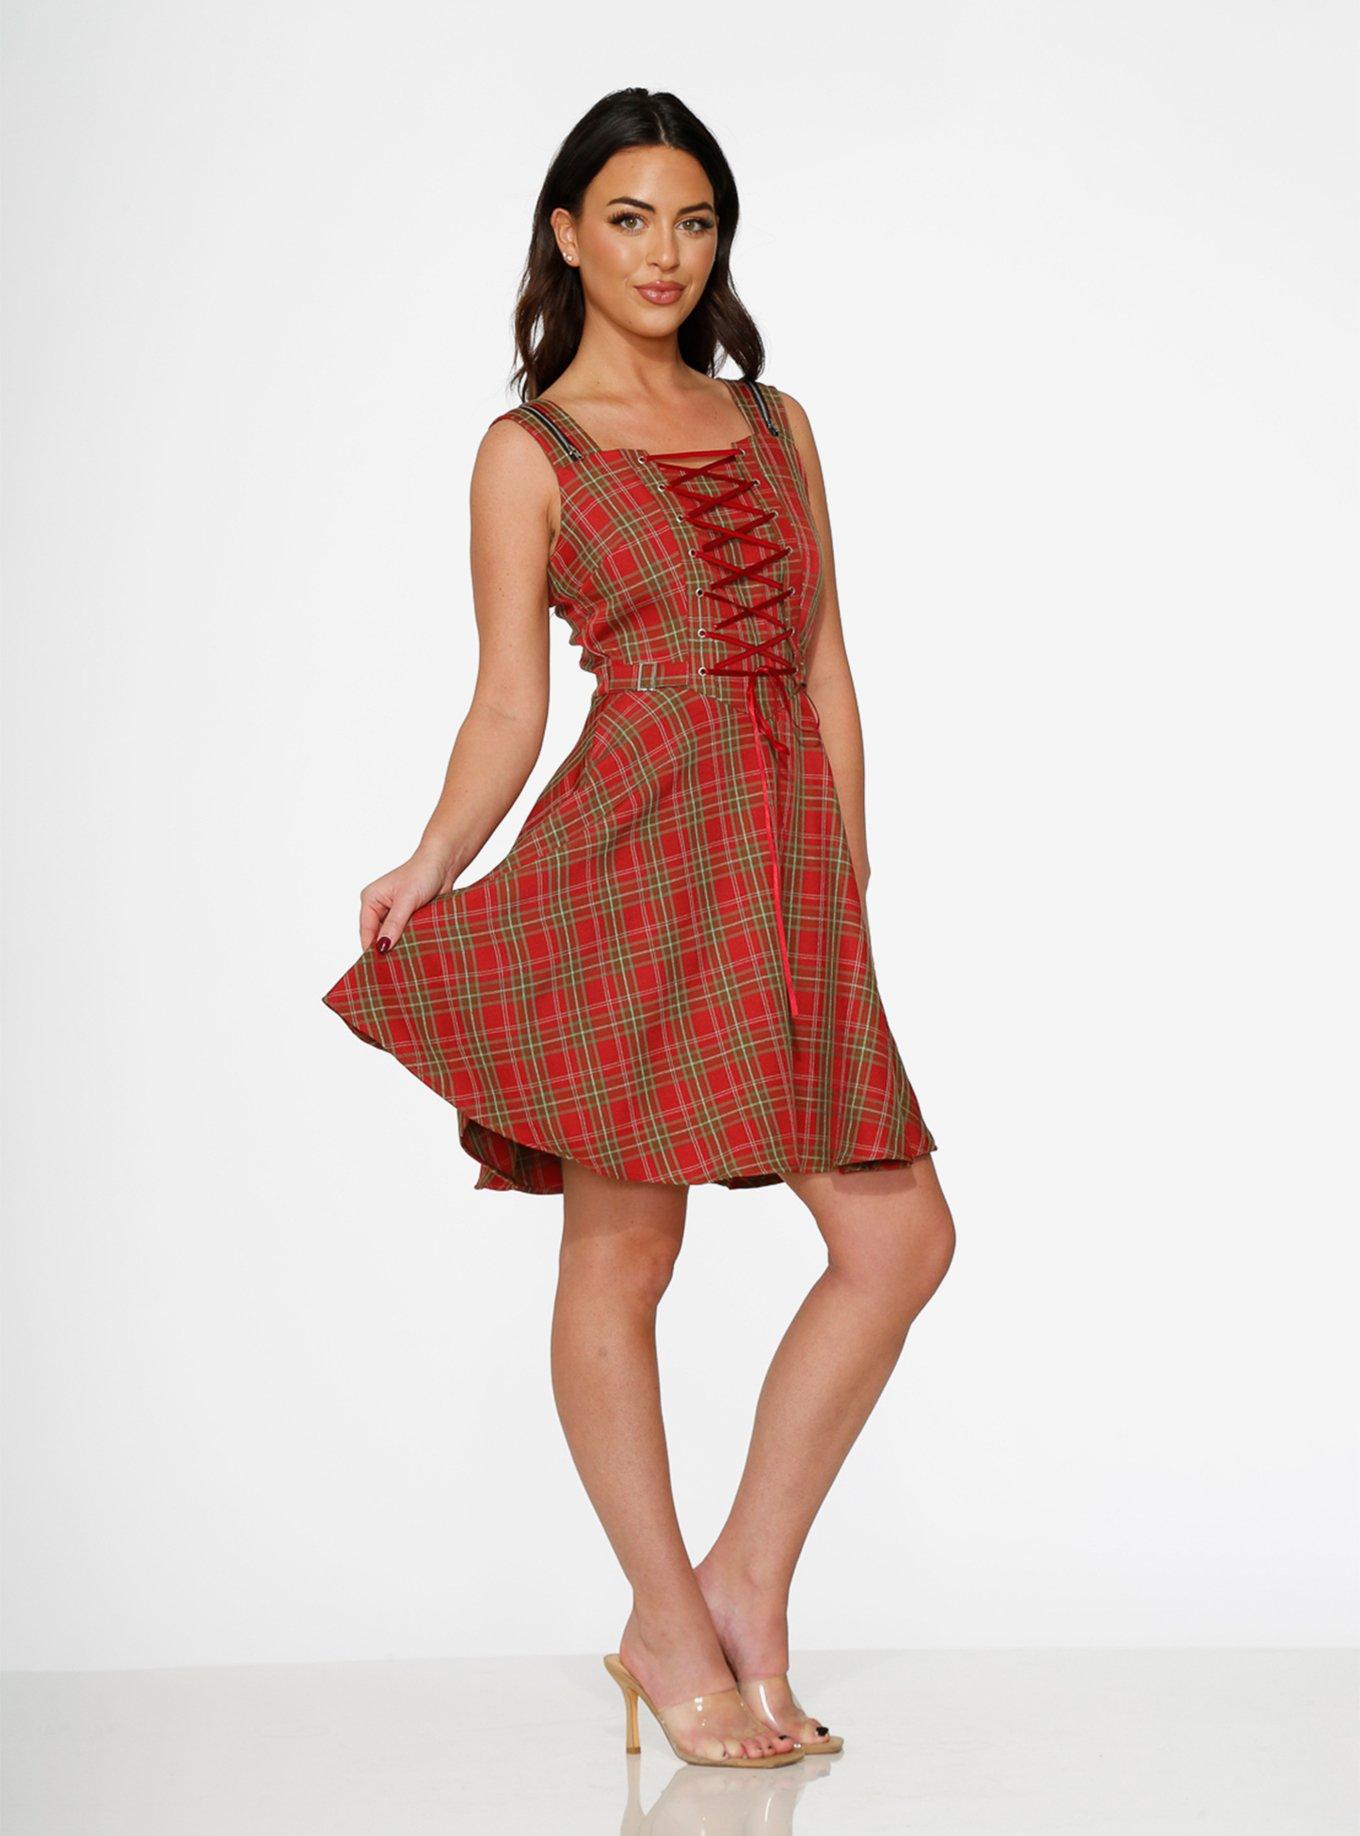 Red Plaid Swing Lace-Up Dress